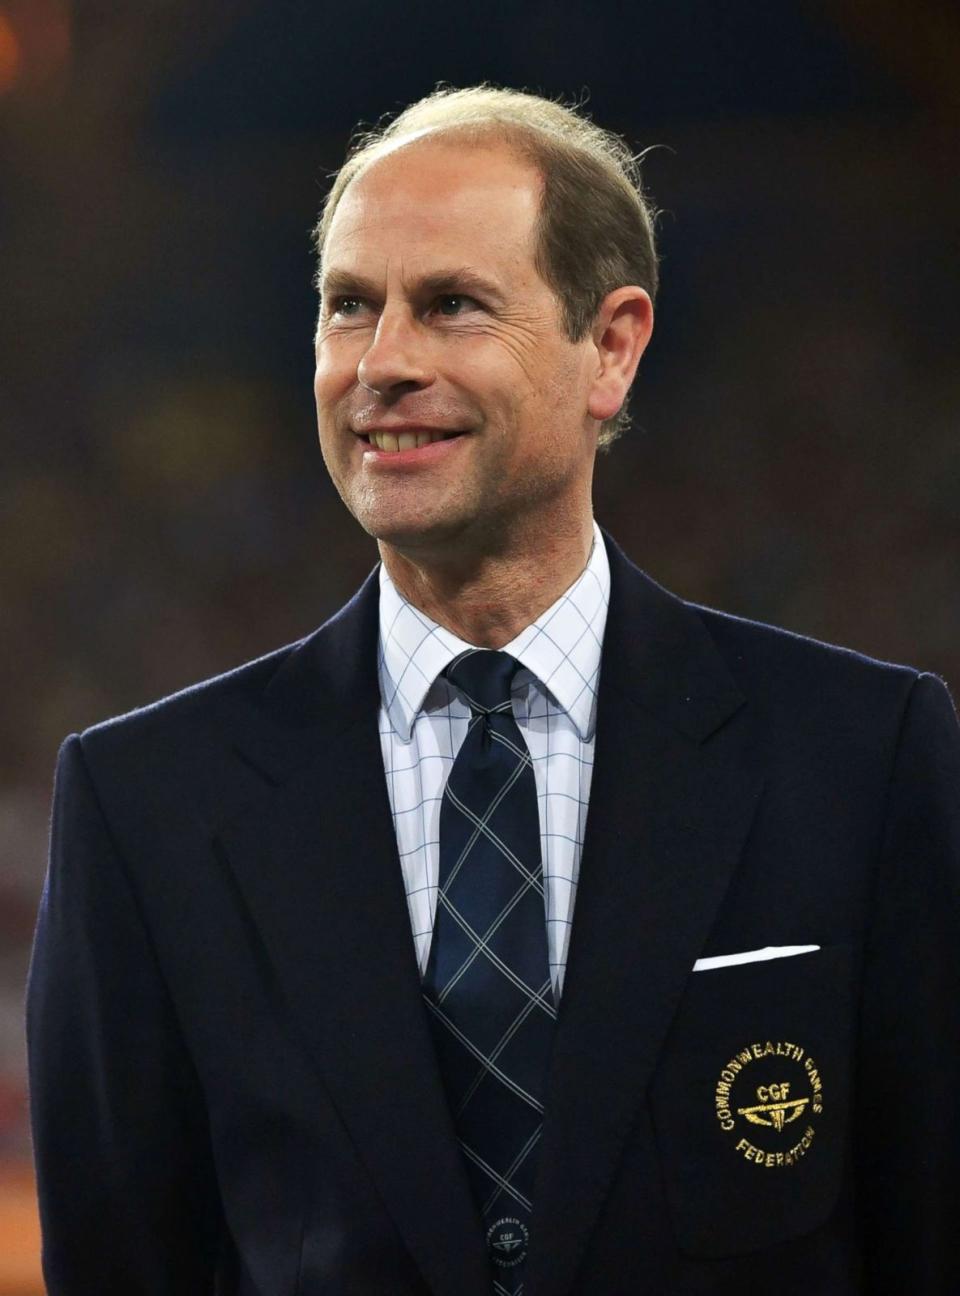 PHOTO: Prince Edward, Earl of Wessex looks on during the medal ceremony for the Women's 400 meters during athletics on day eight of the Gold Coast 2018 Commonwealth Games at Carrara Stadium on April 12, 2018 on the Gold Coast, Australia. (Dan Mullan/Getty Images)